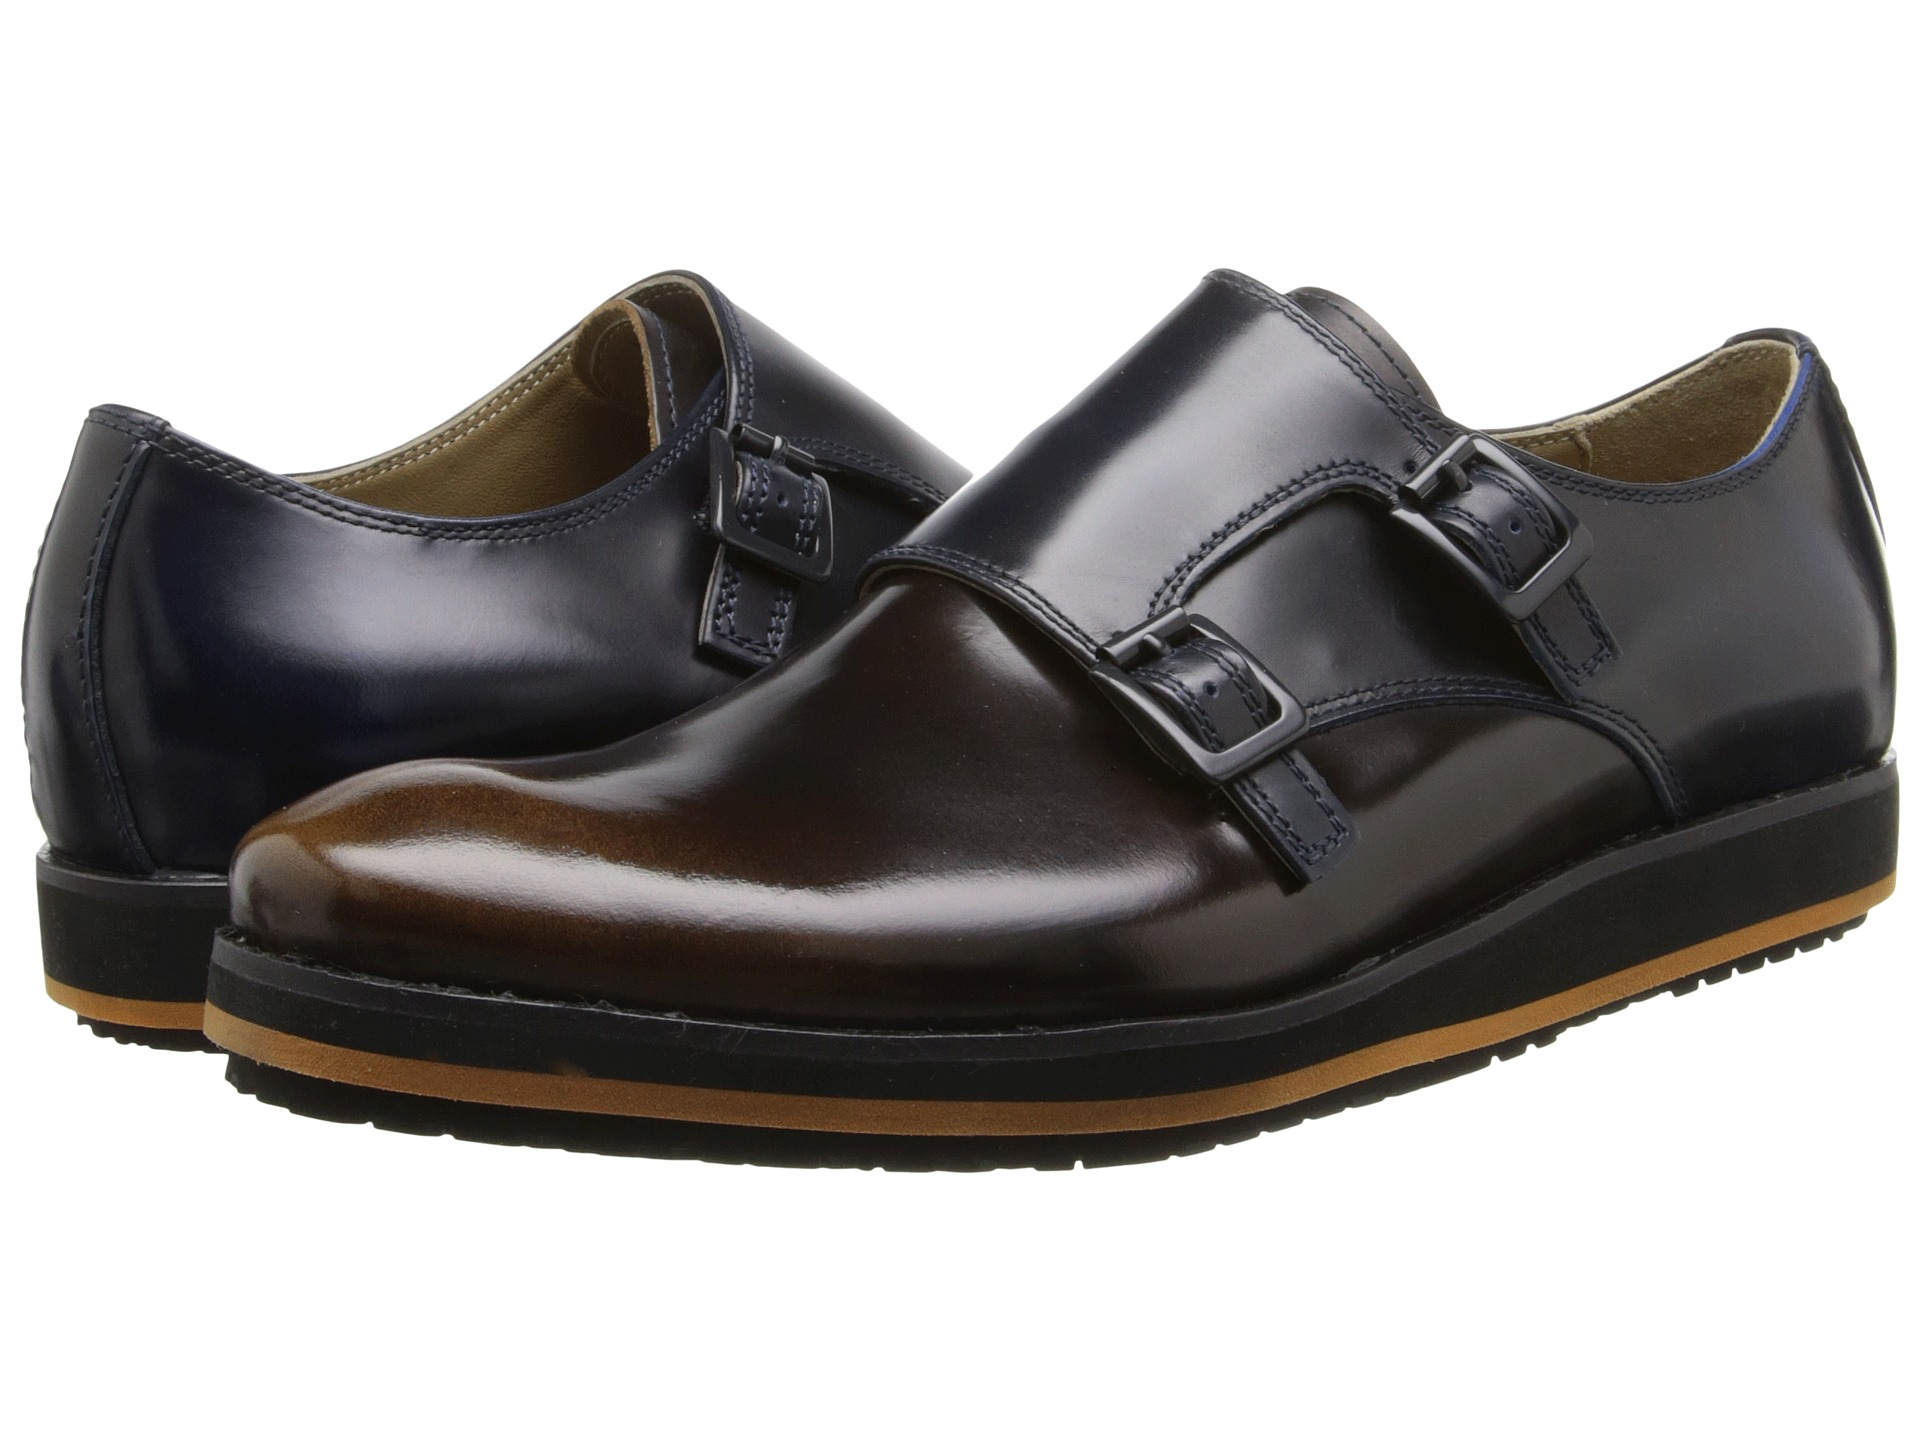 hush puppies double monk strap